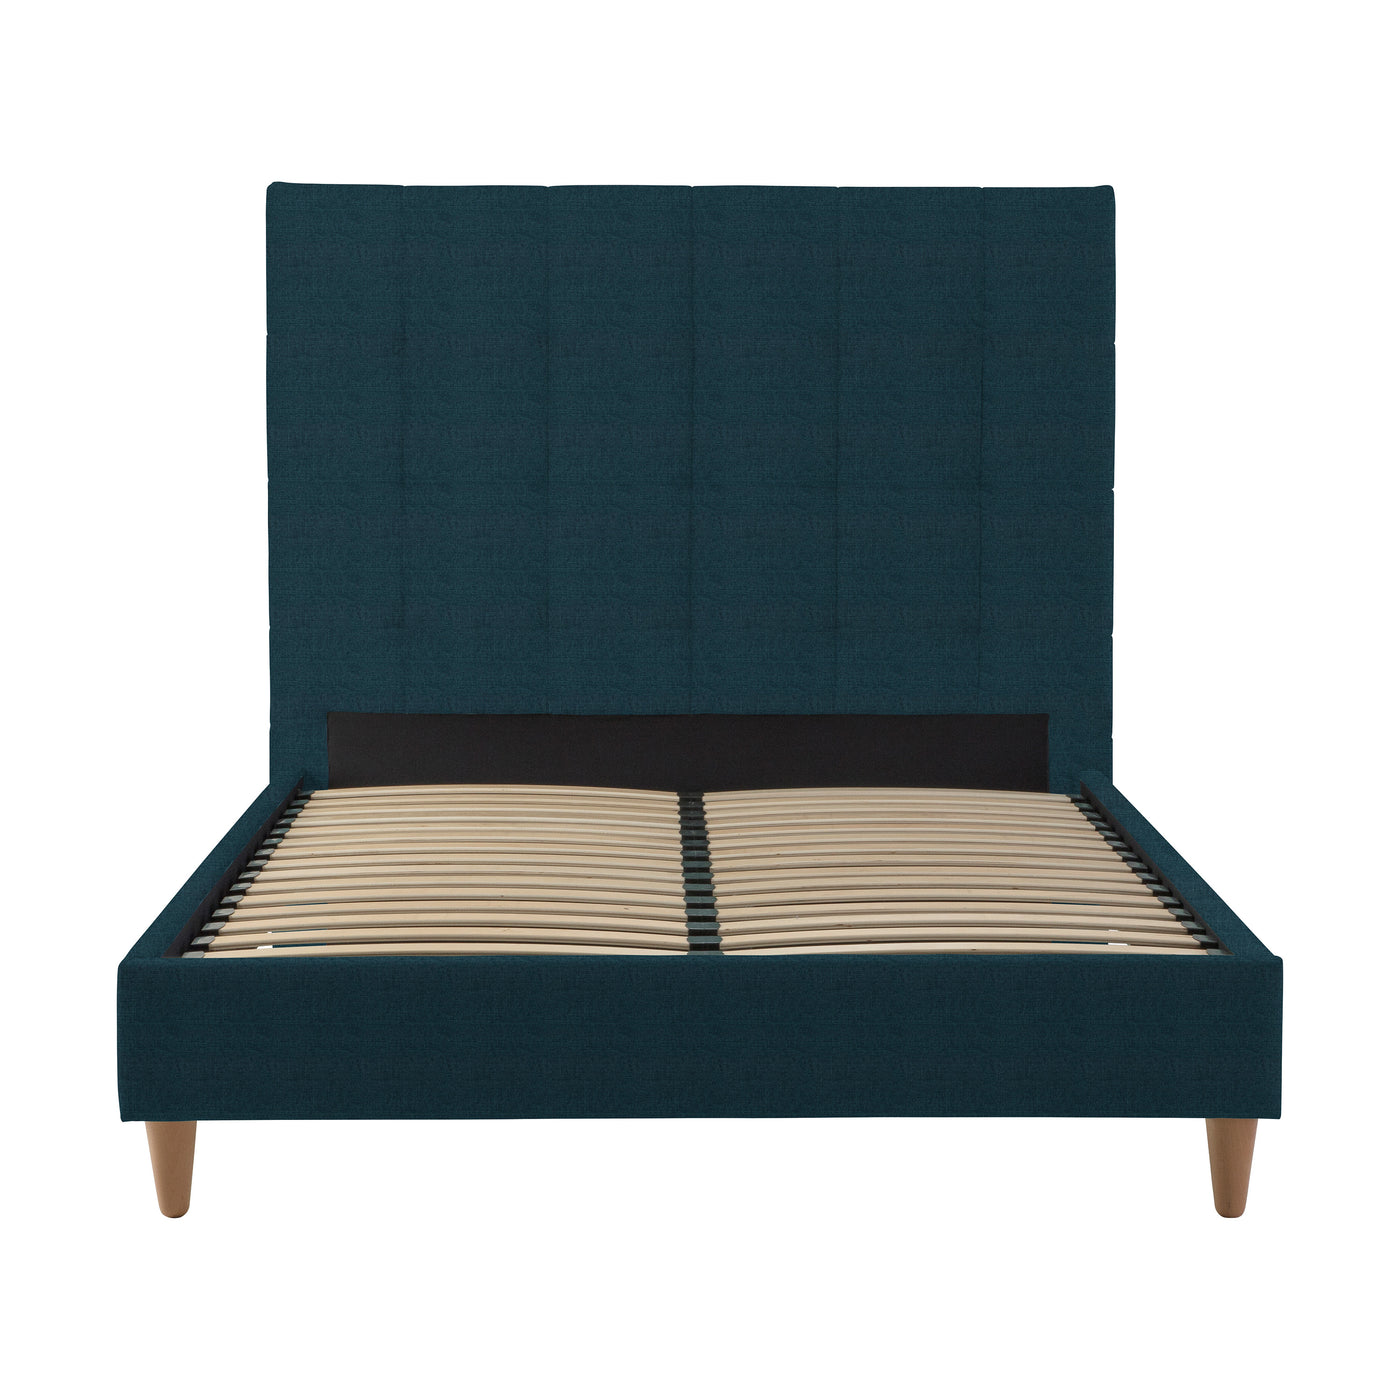 Asheford Super King Bedstead ChesQuin Interiors Beds